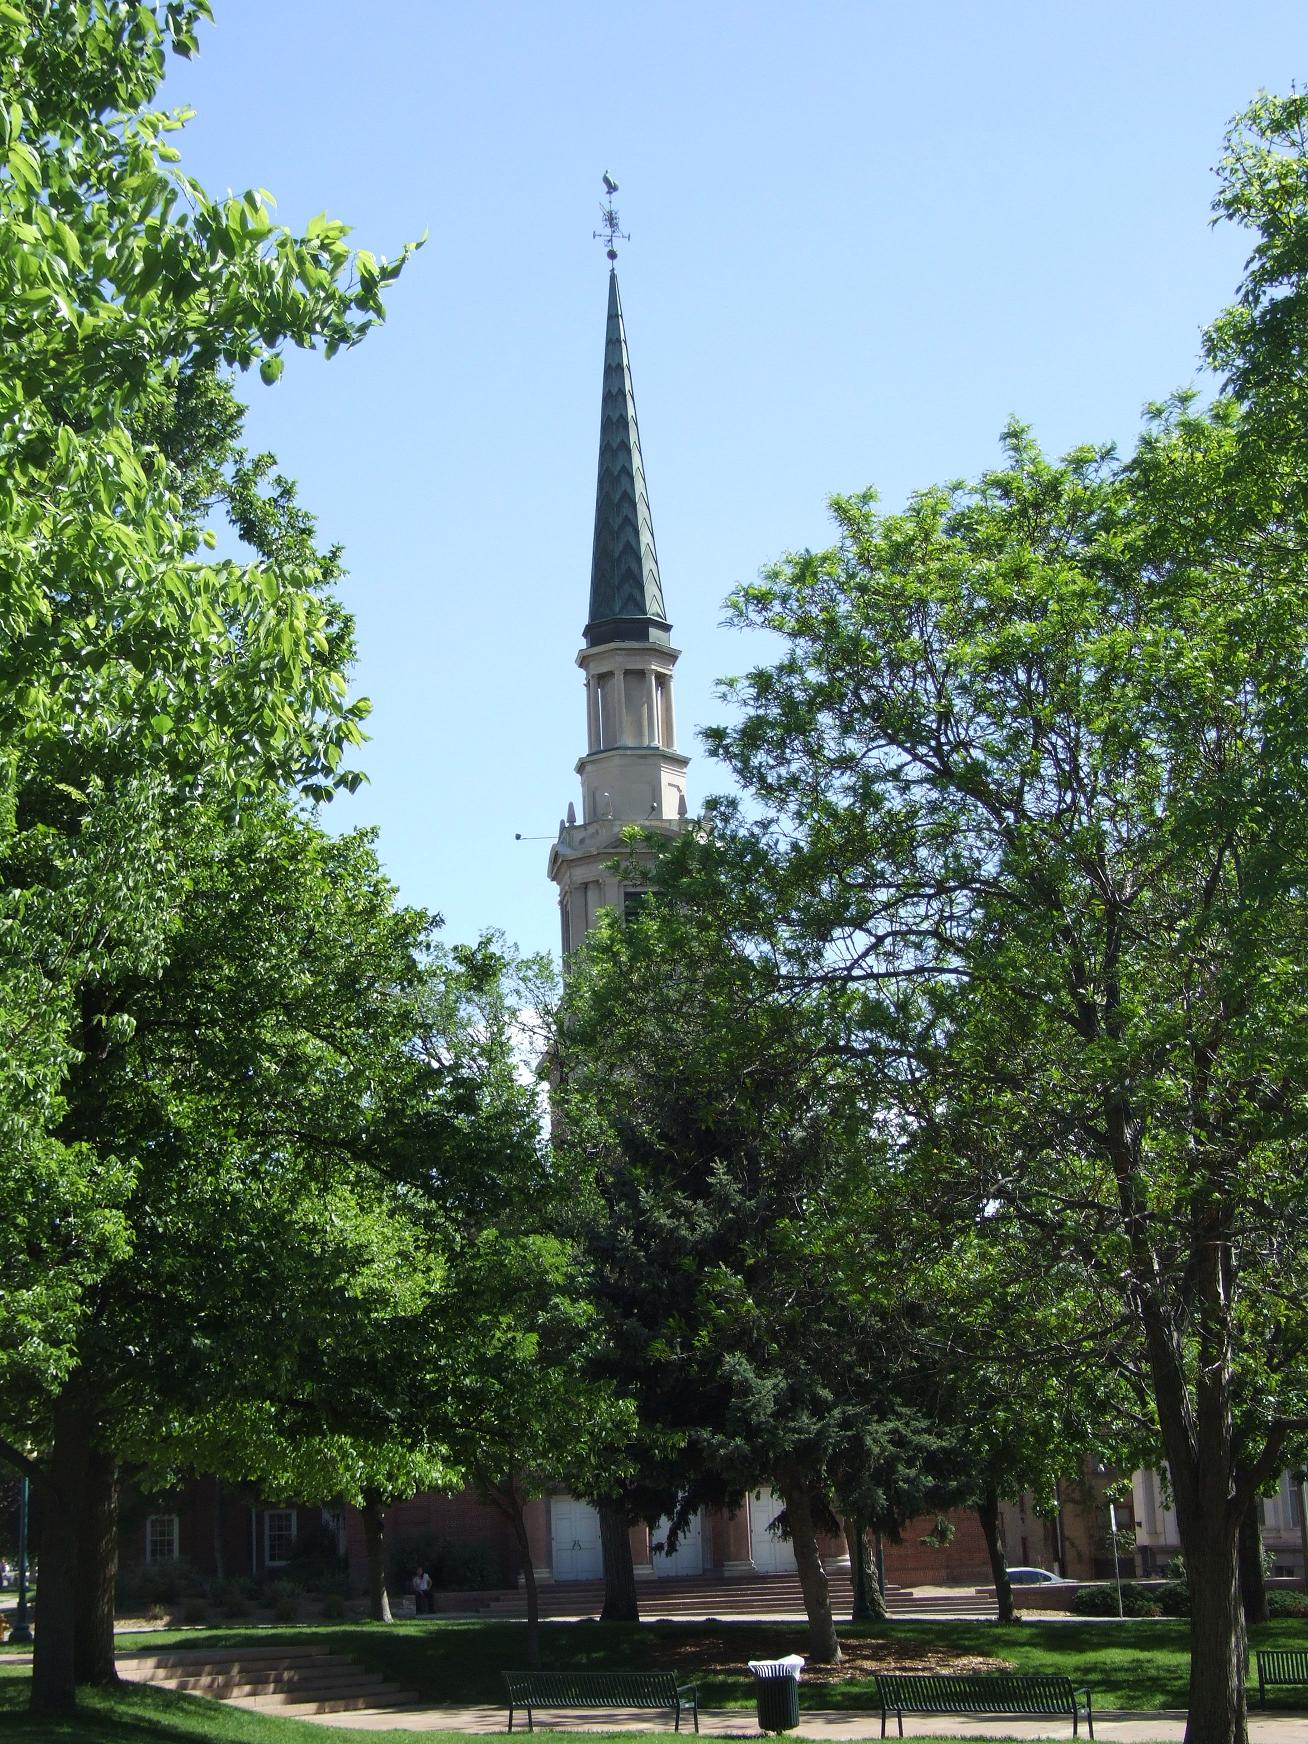 a view of trees and a church tower in the distance